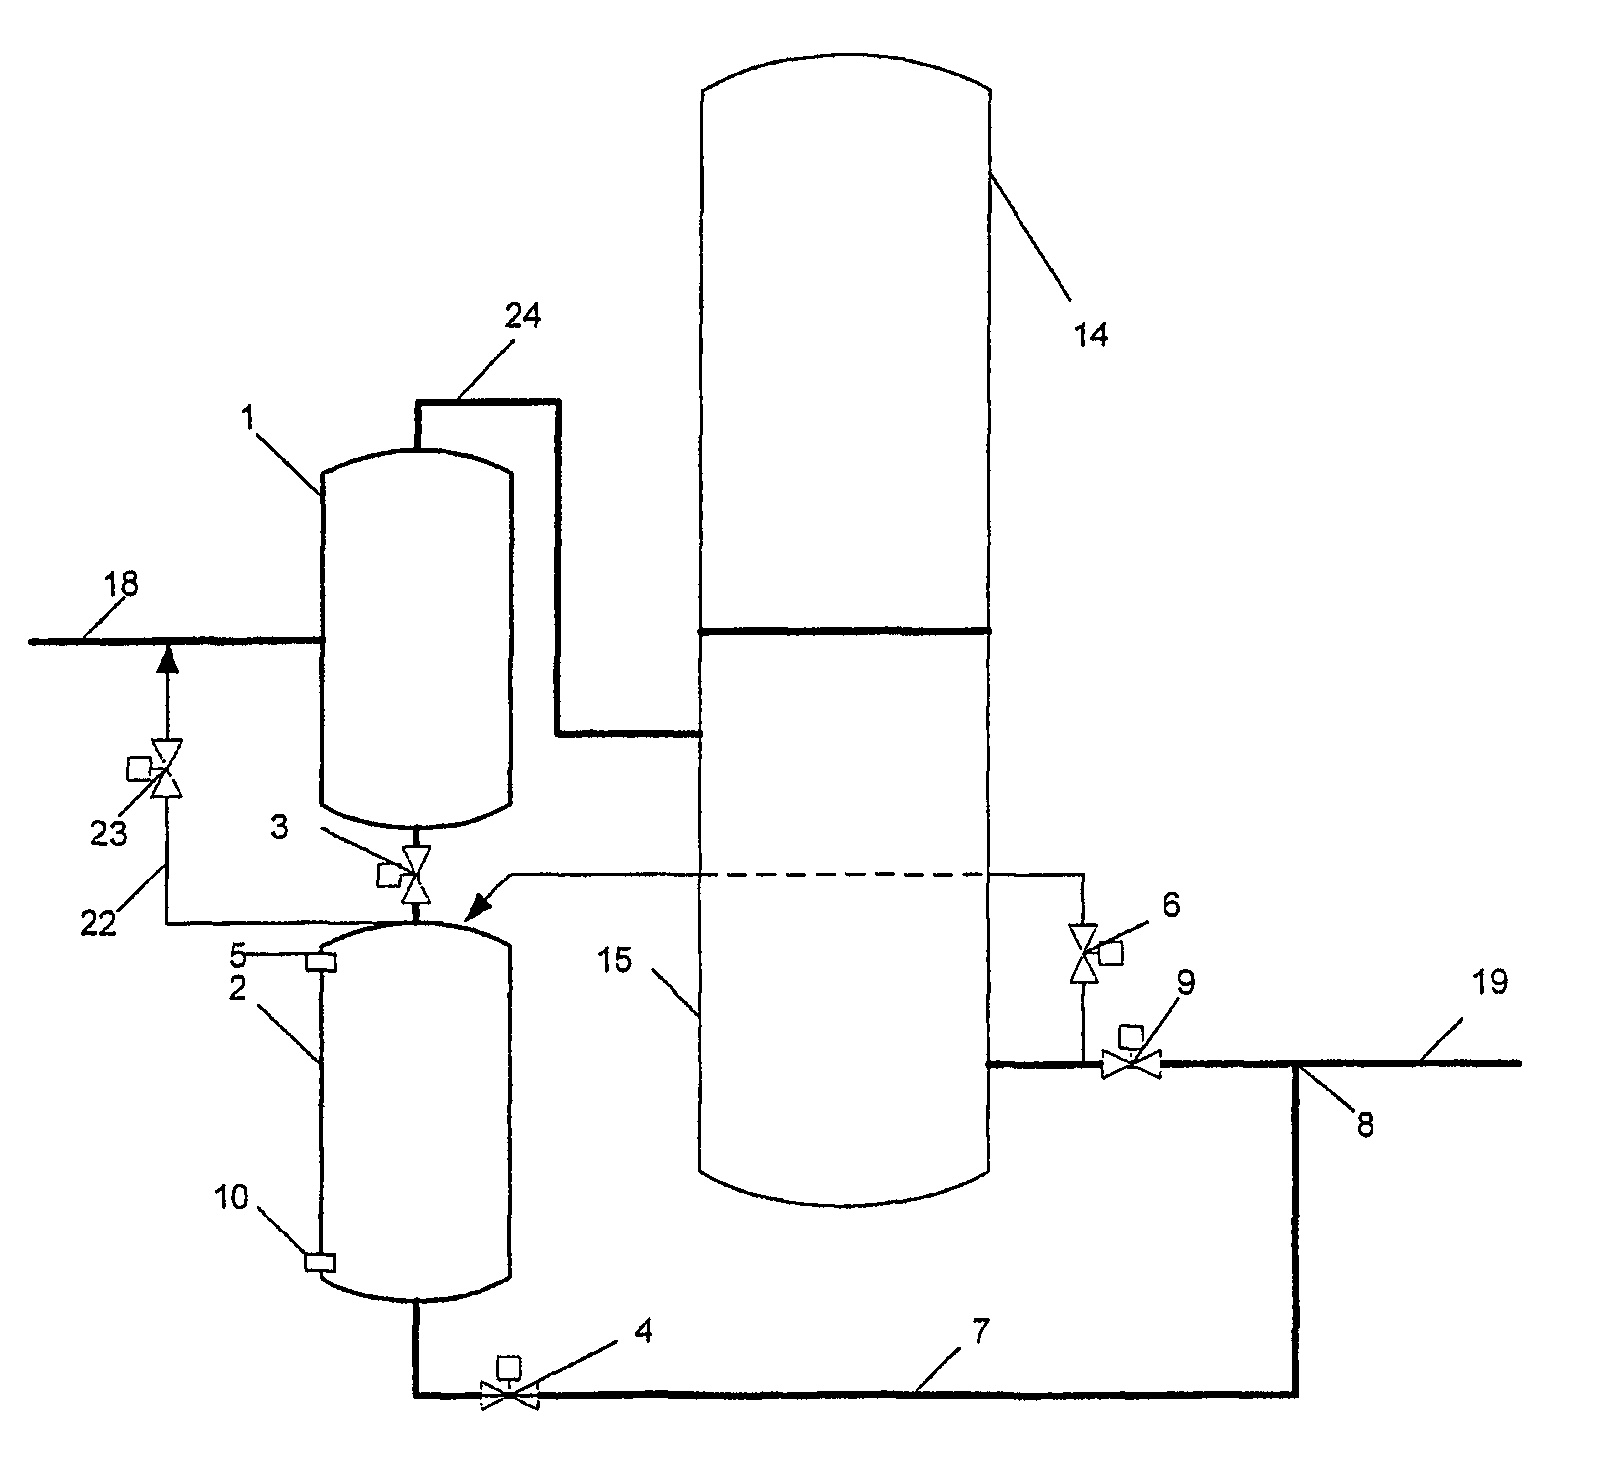 Device for separating and collecting fluid in gas from a reservoir